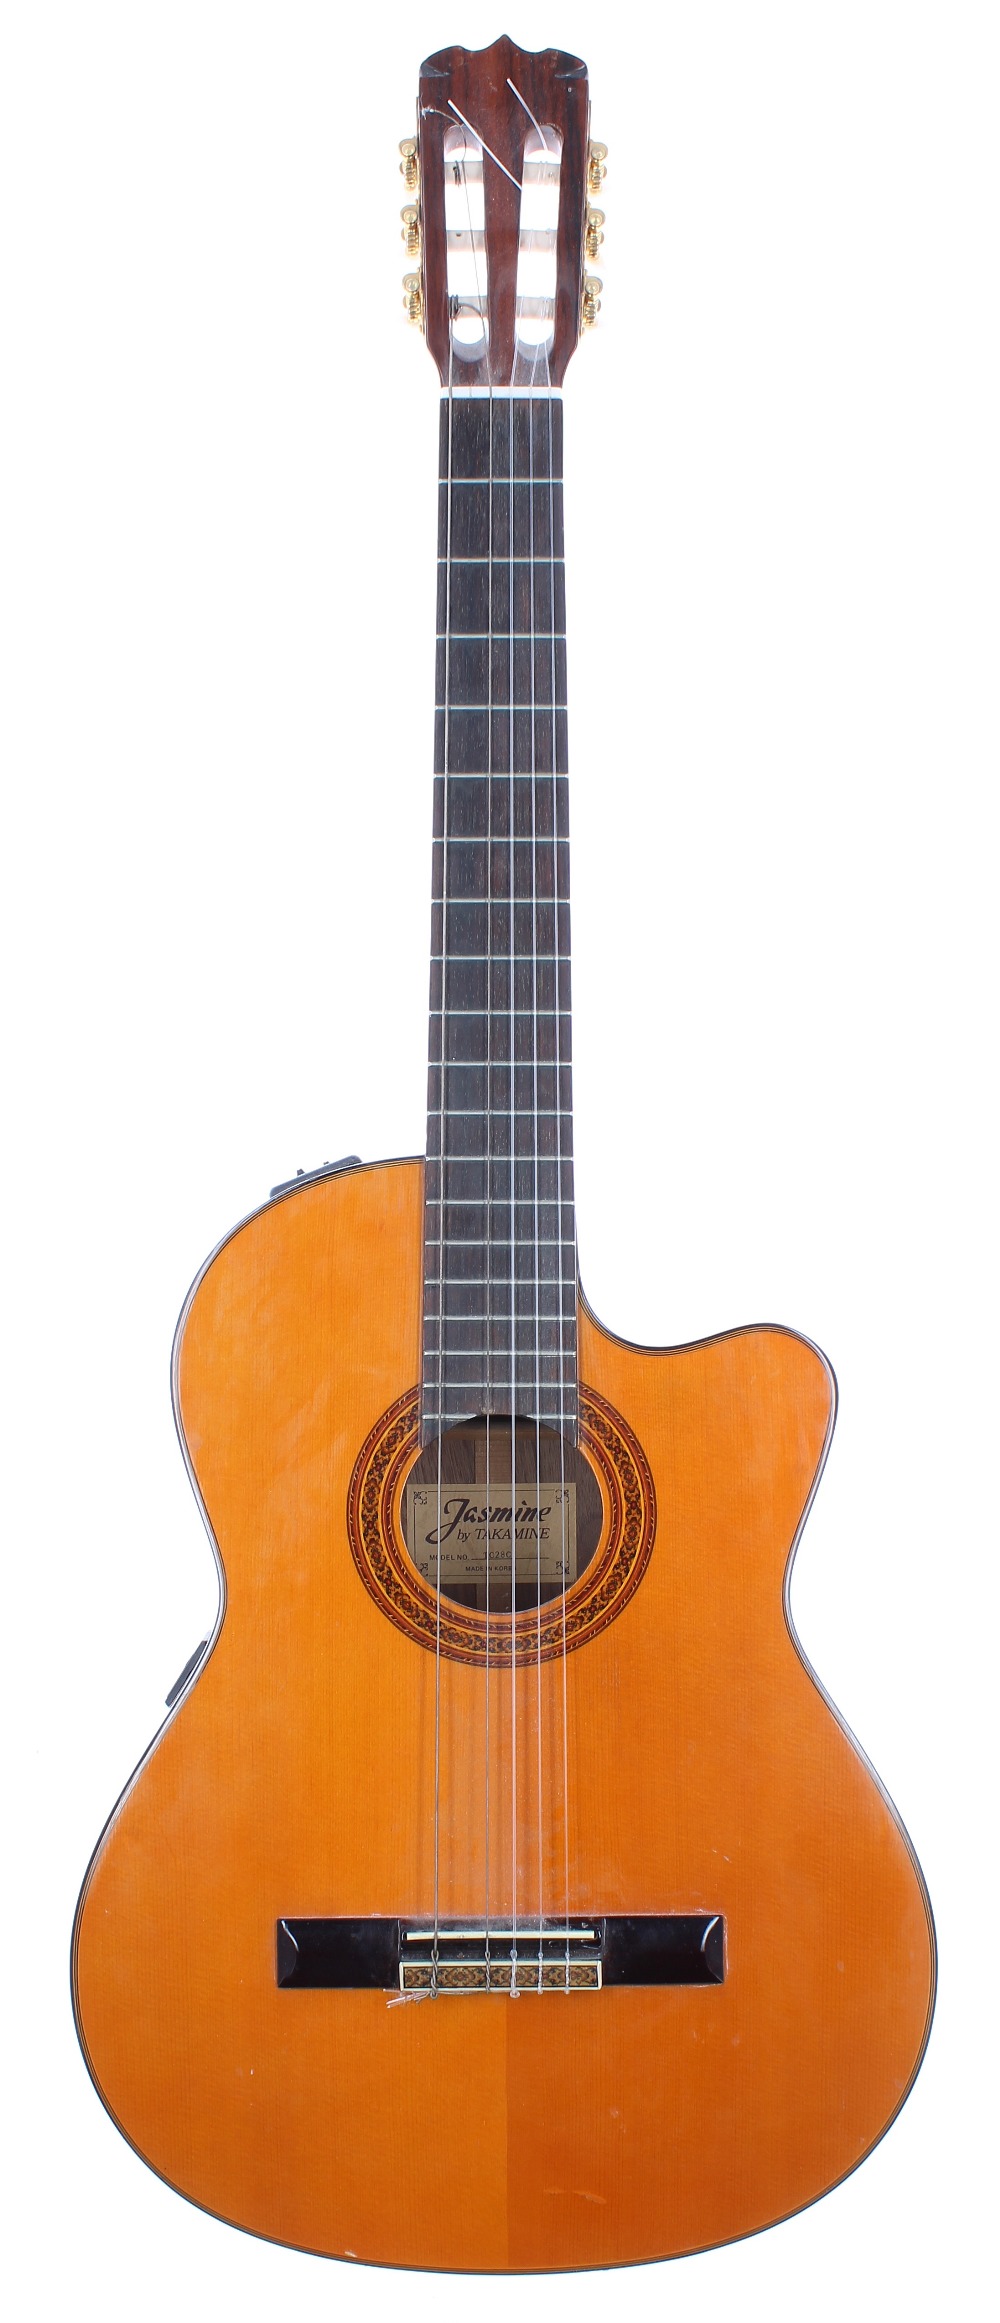 Jasmine by Takamine TC28C electro-classical guitar, made in Korea, ser. no. 8xxxx1; Back & Sides: